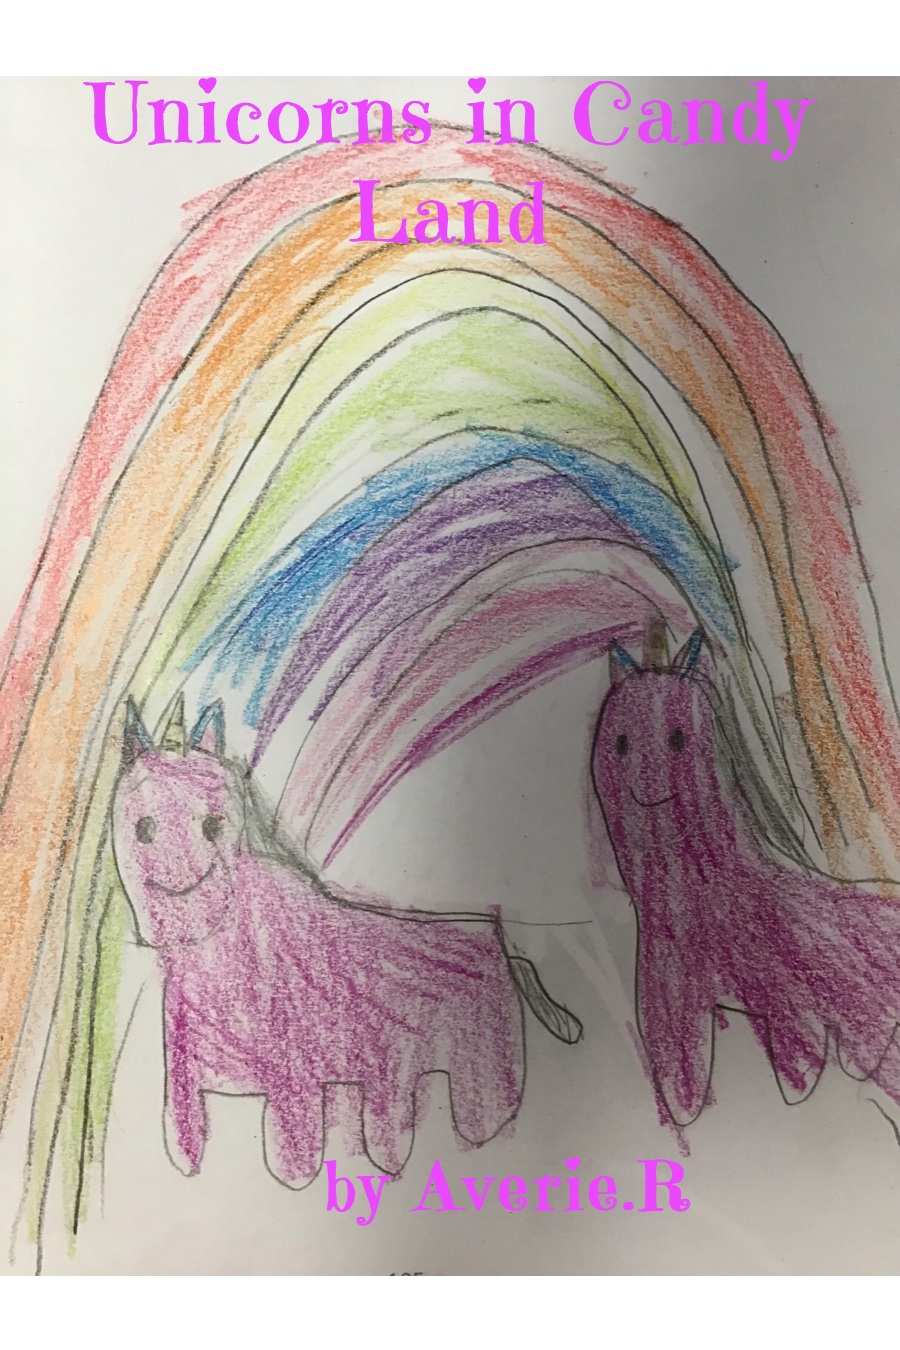 Unicorns in Candy Land and More by Averie R